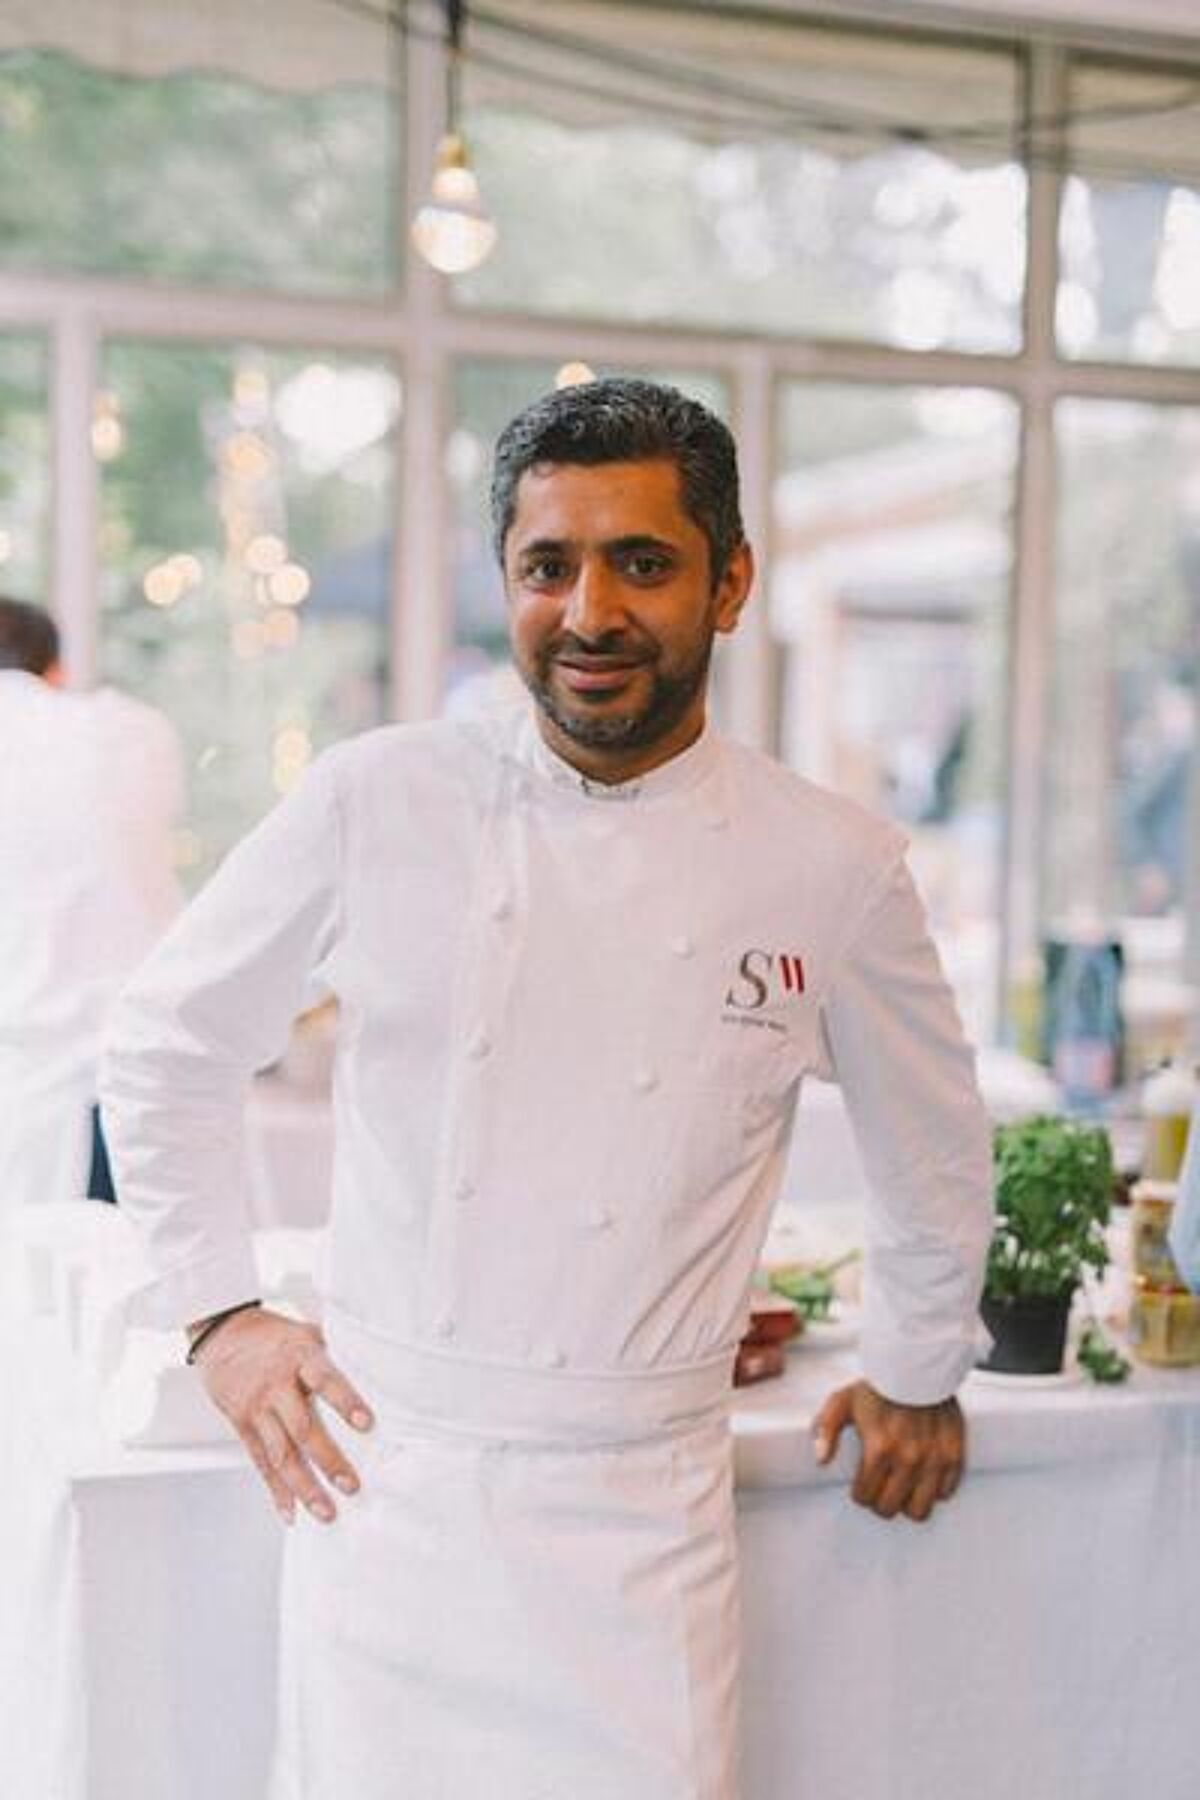 Le chef Sylvestre Wahid (Brasserie Thoumieux)